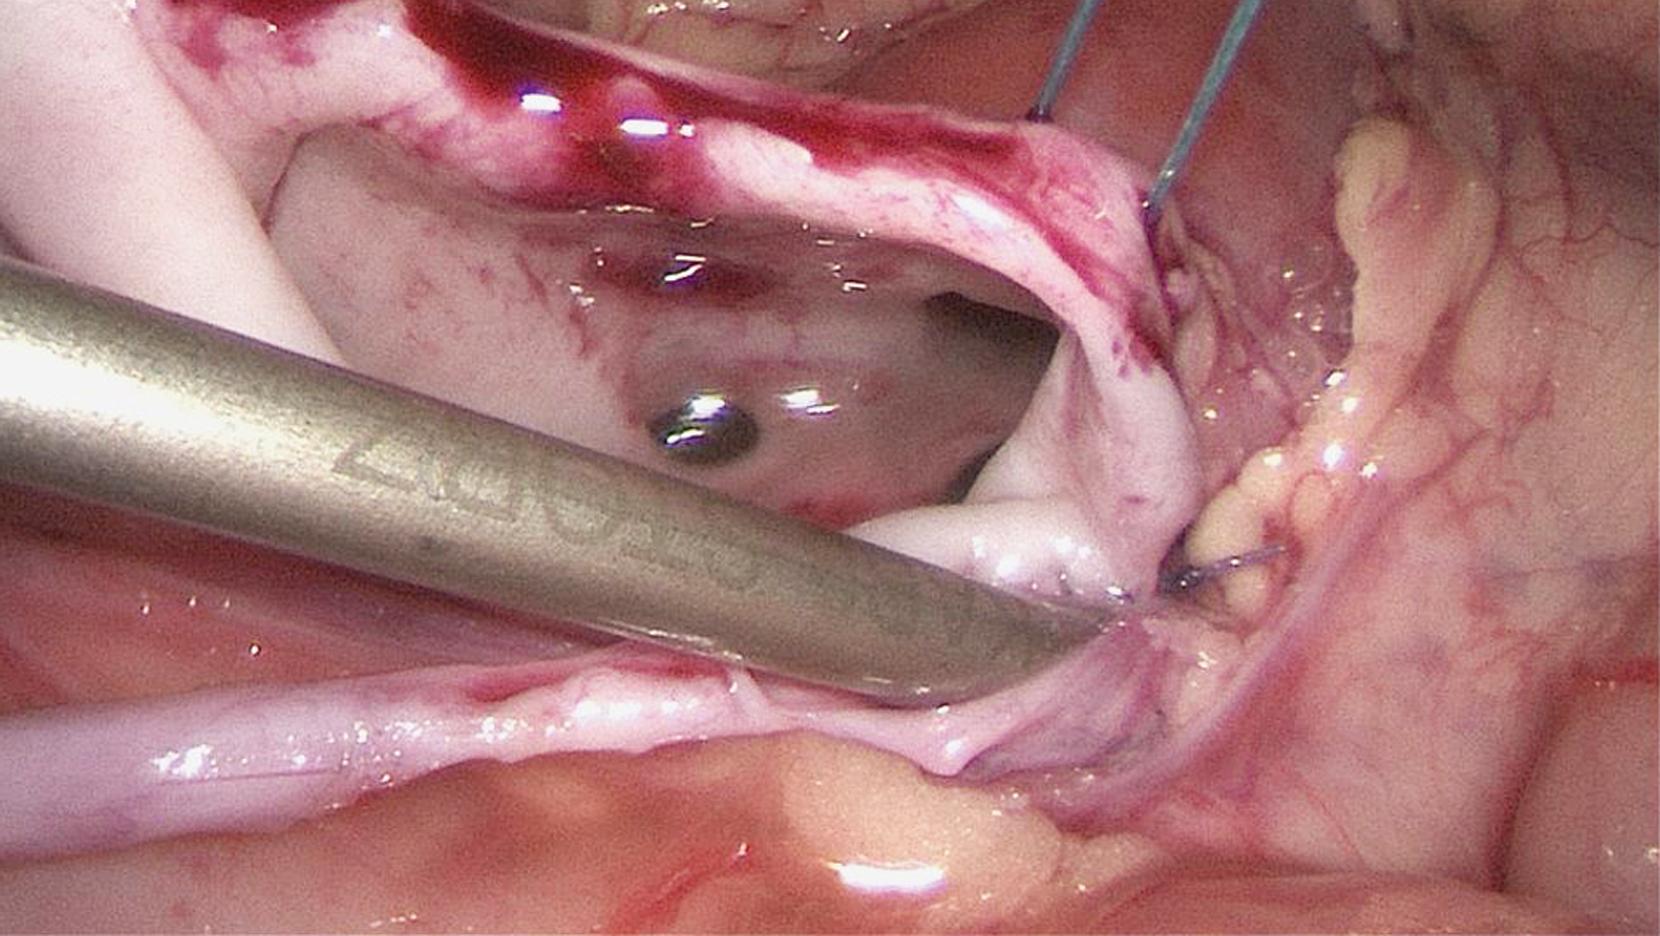 Fig. 28-4, After completing the back wall of the side-to-side anastomosis, the patency of the anastomosis is checked before securing the front wall.